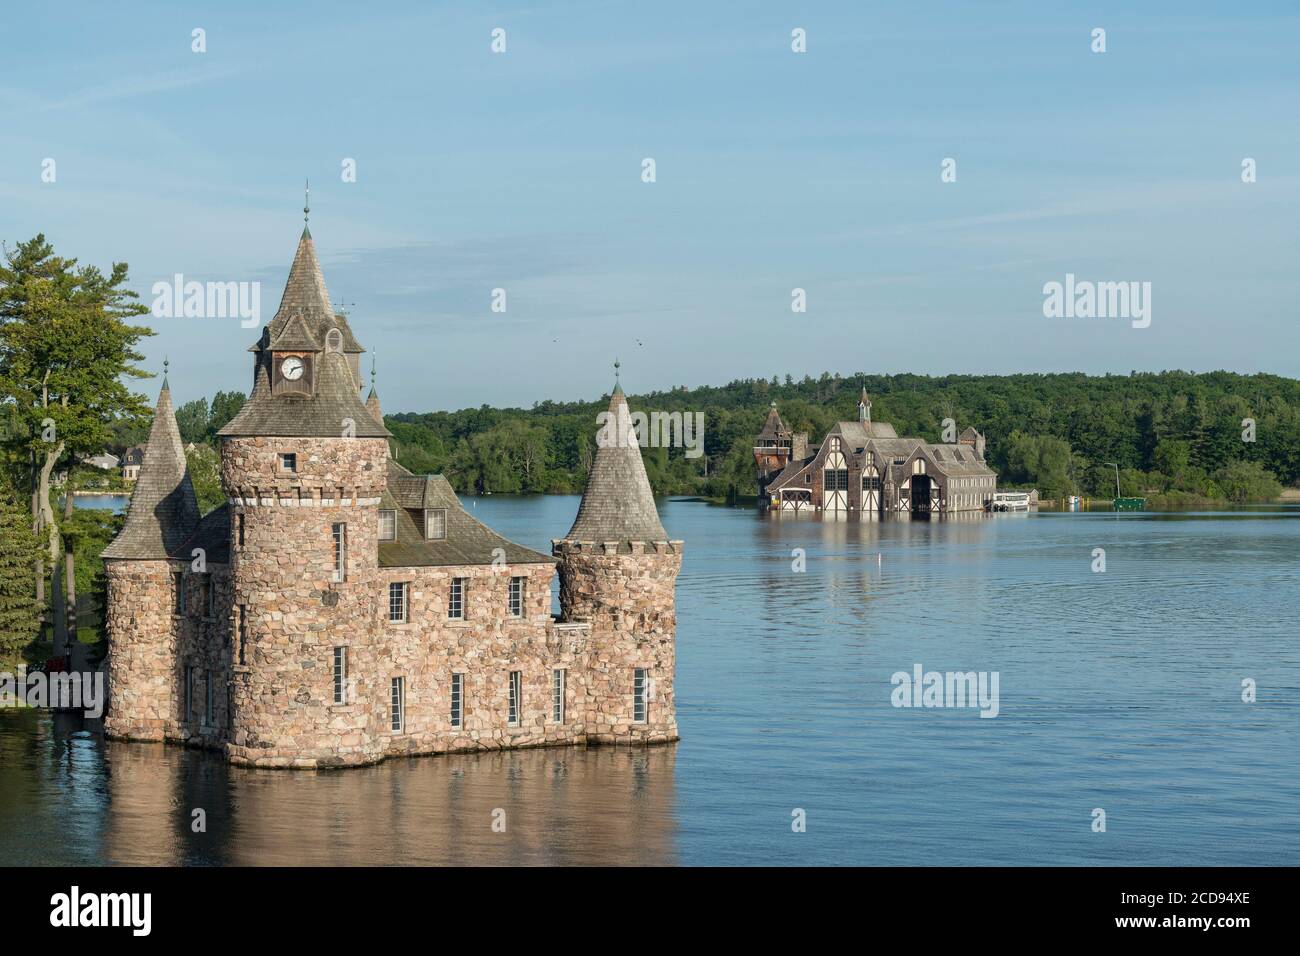 United States, New York State, Alexandria Bay, Heart Island and Boldt Castle on the St. Lawrence River in the Thousand Islands Stock Photo